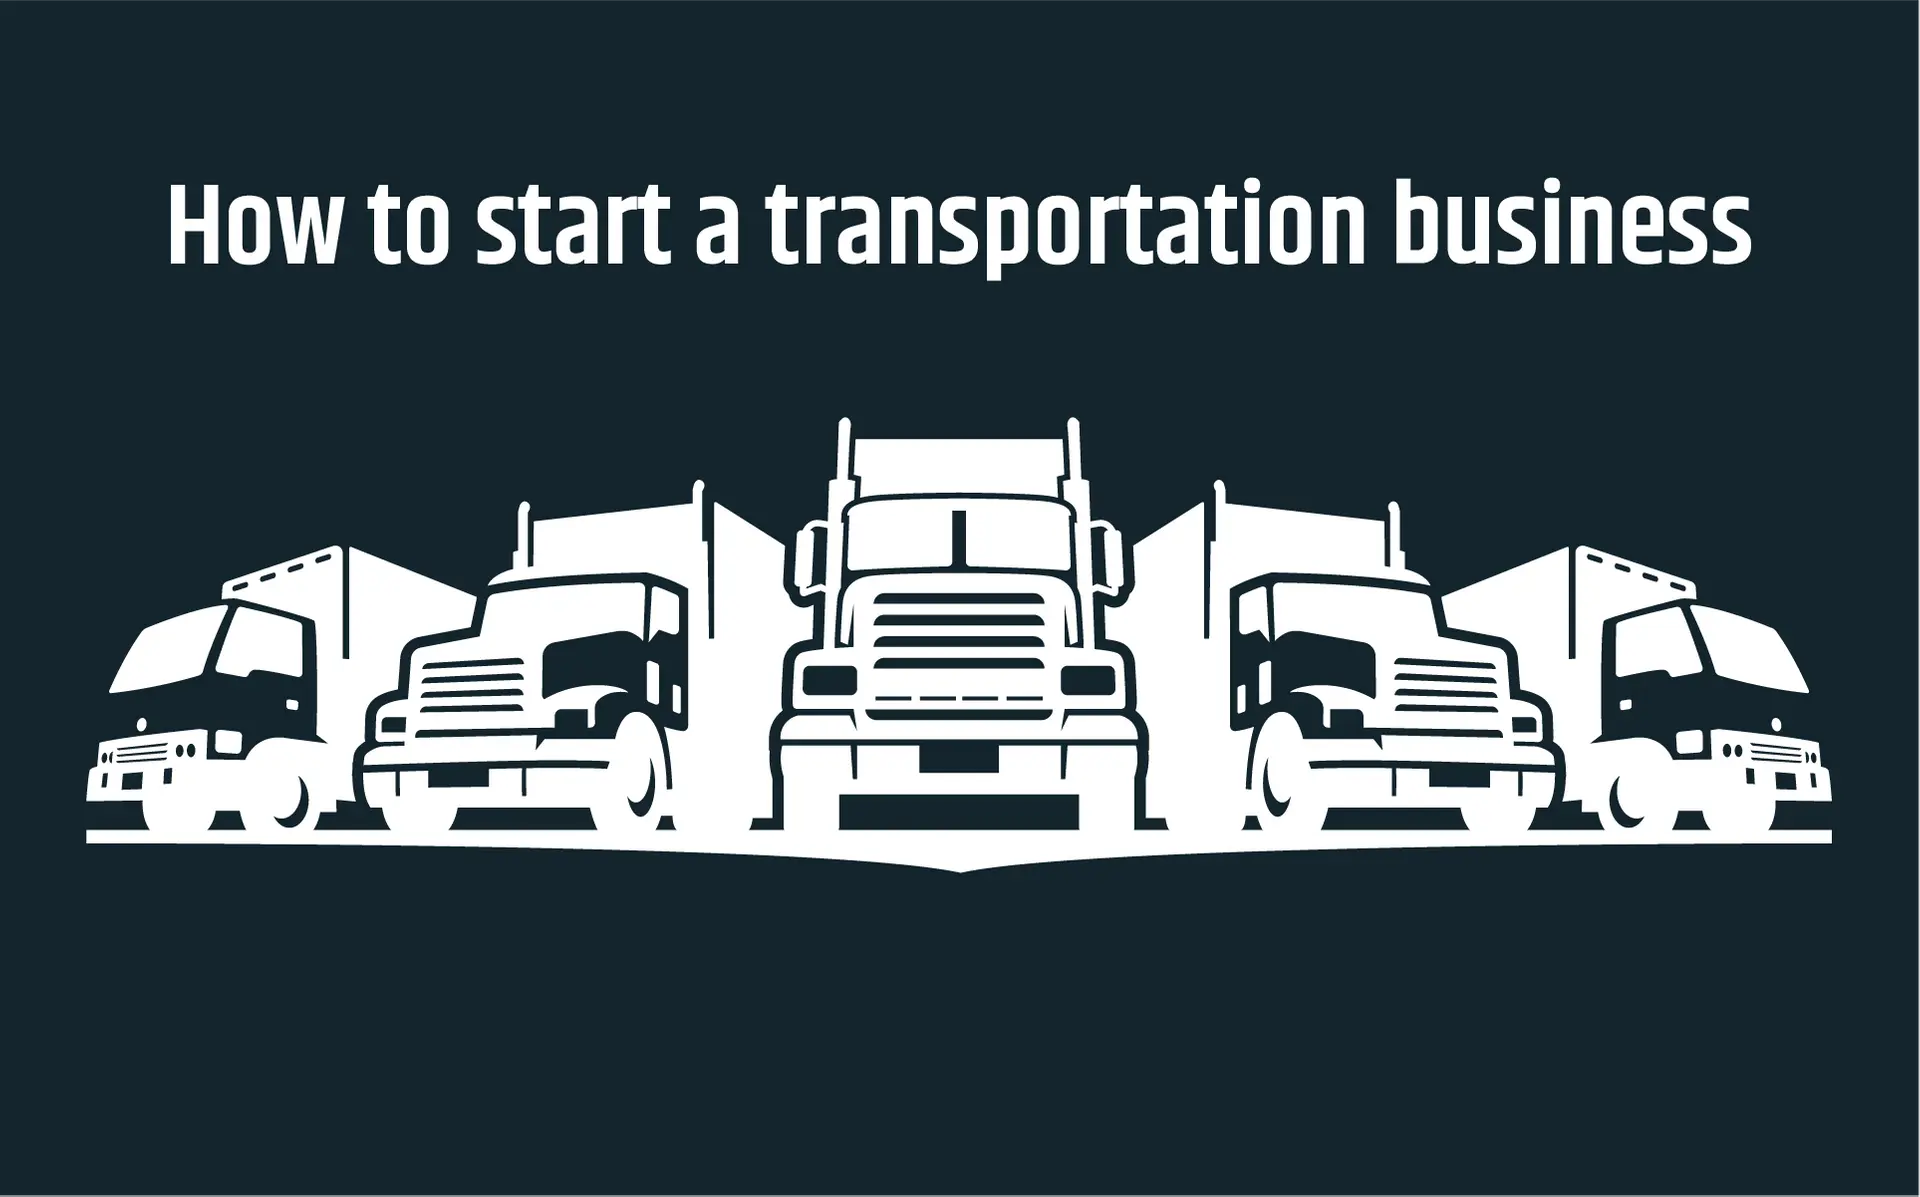 How To Start a Goods Transport Business in 2022